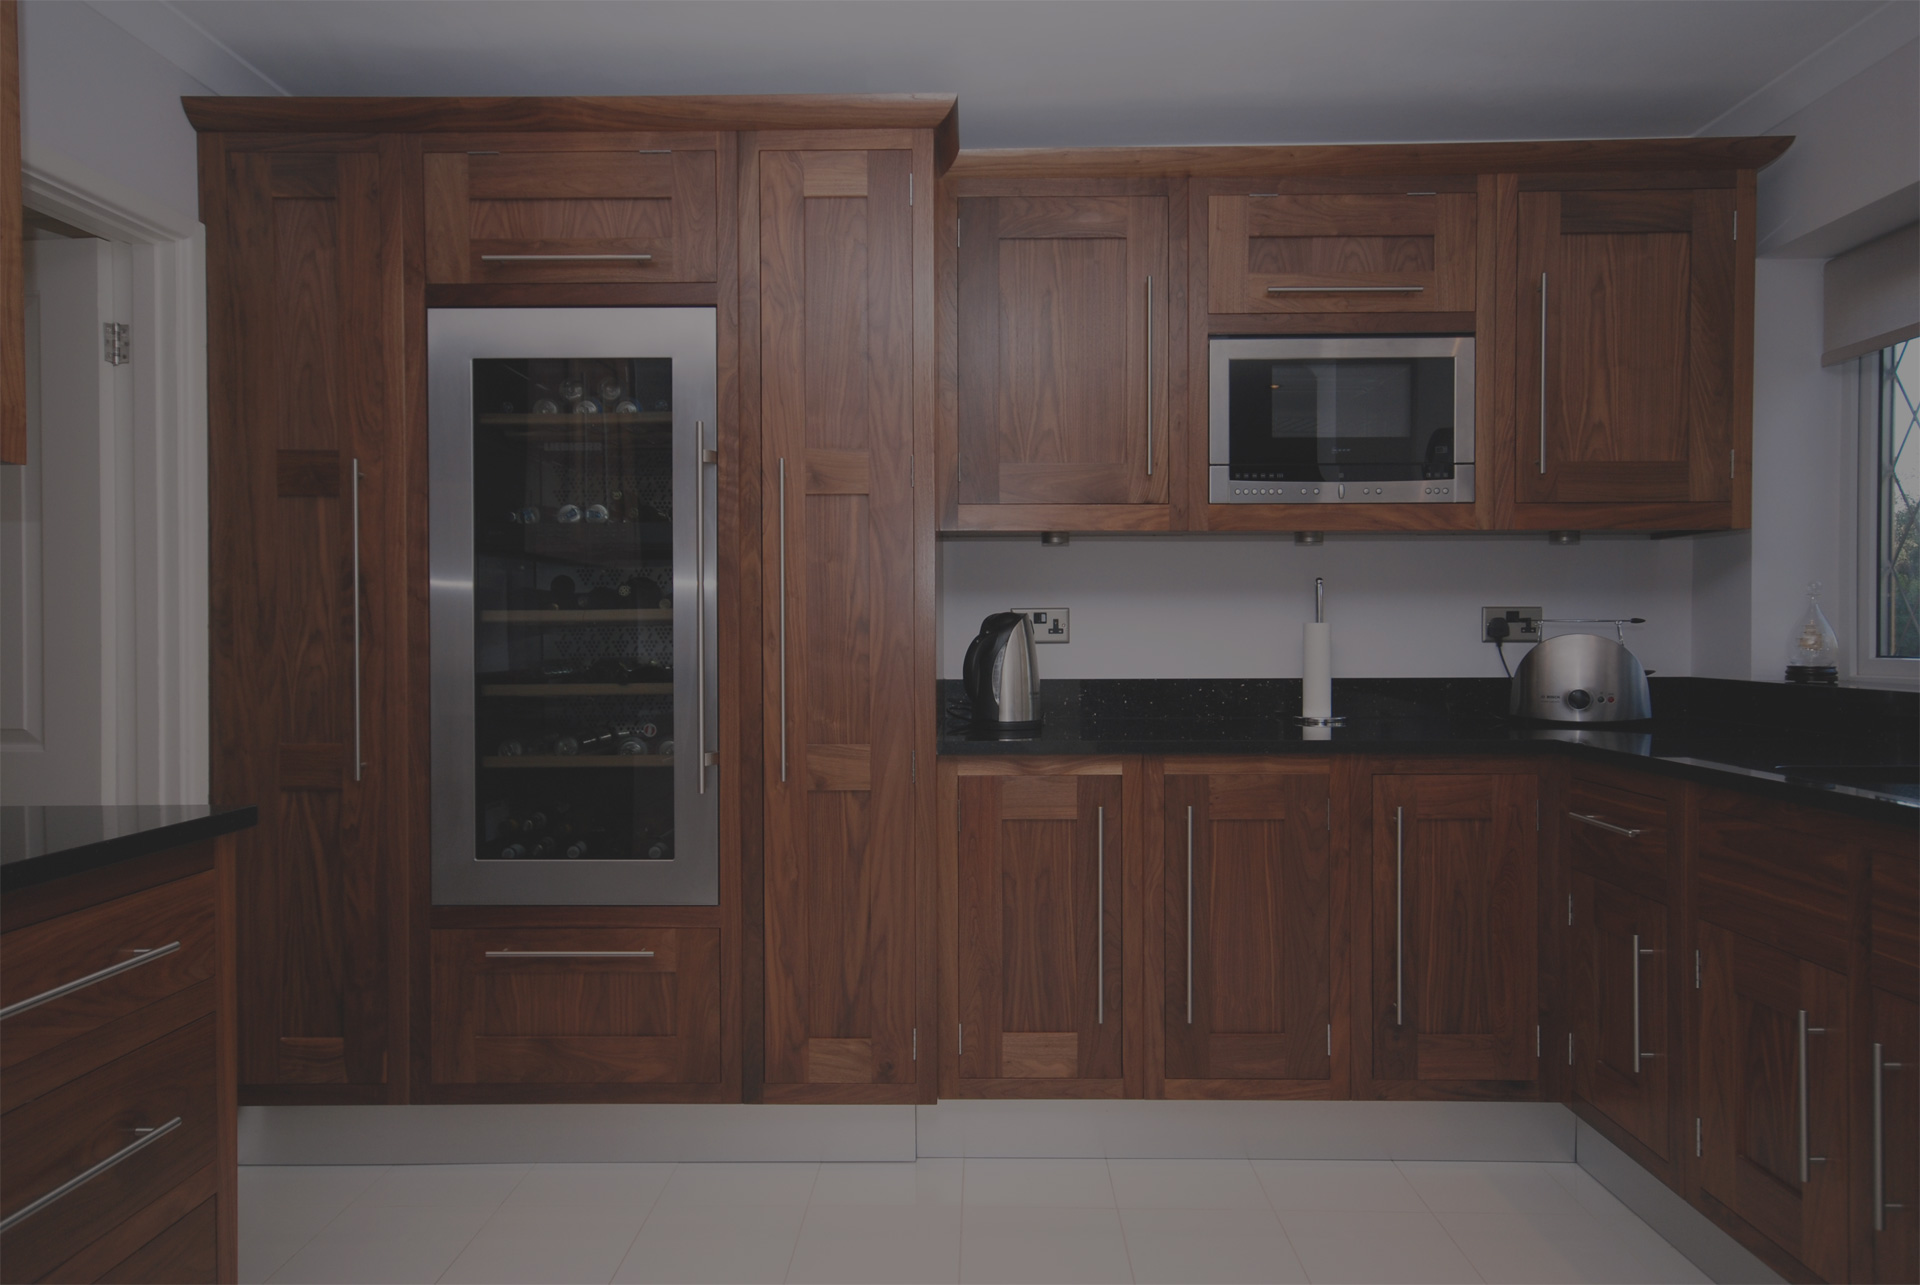 We Specialise in Handcrafted Bespoke Kitchens